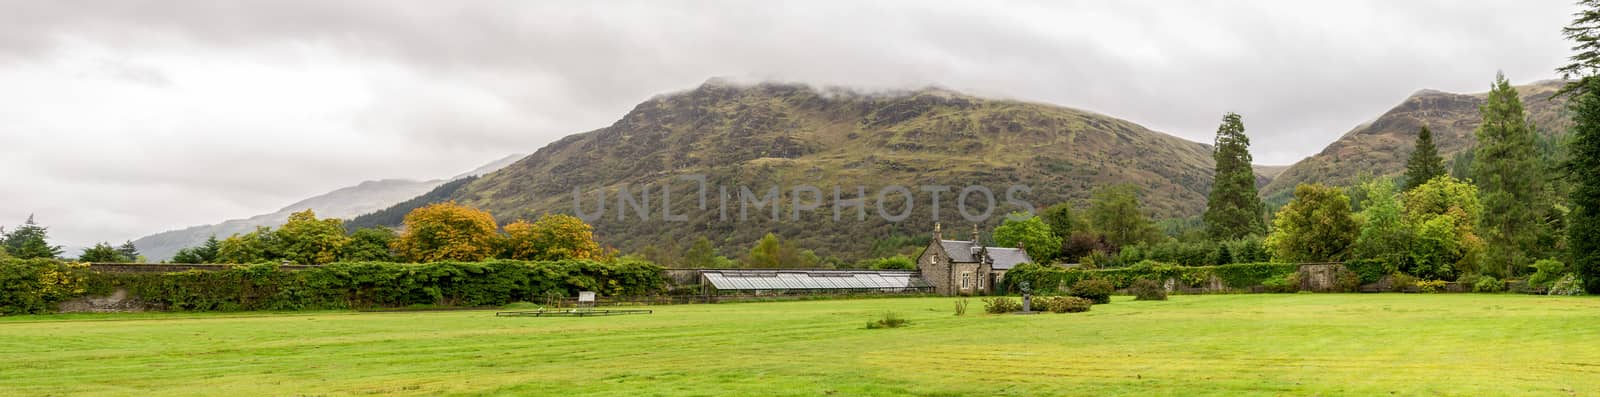 Panorama of the lawn in front of a glasshouse with plants in Benmore Botanic Garden, Loch Lomond and the Trossachs National Park, Scotland by anastasstyles